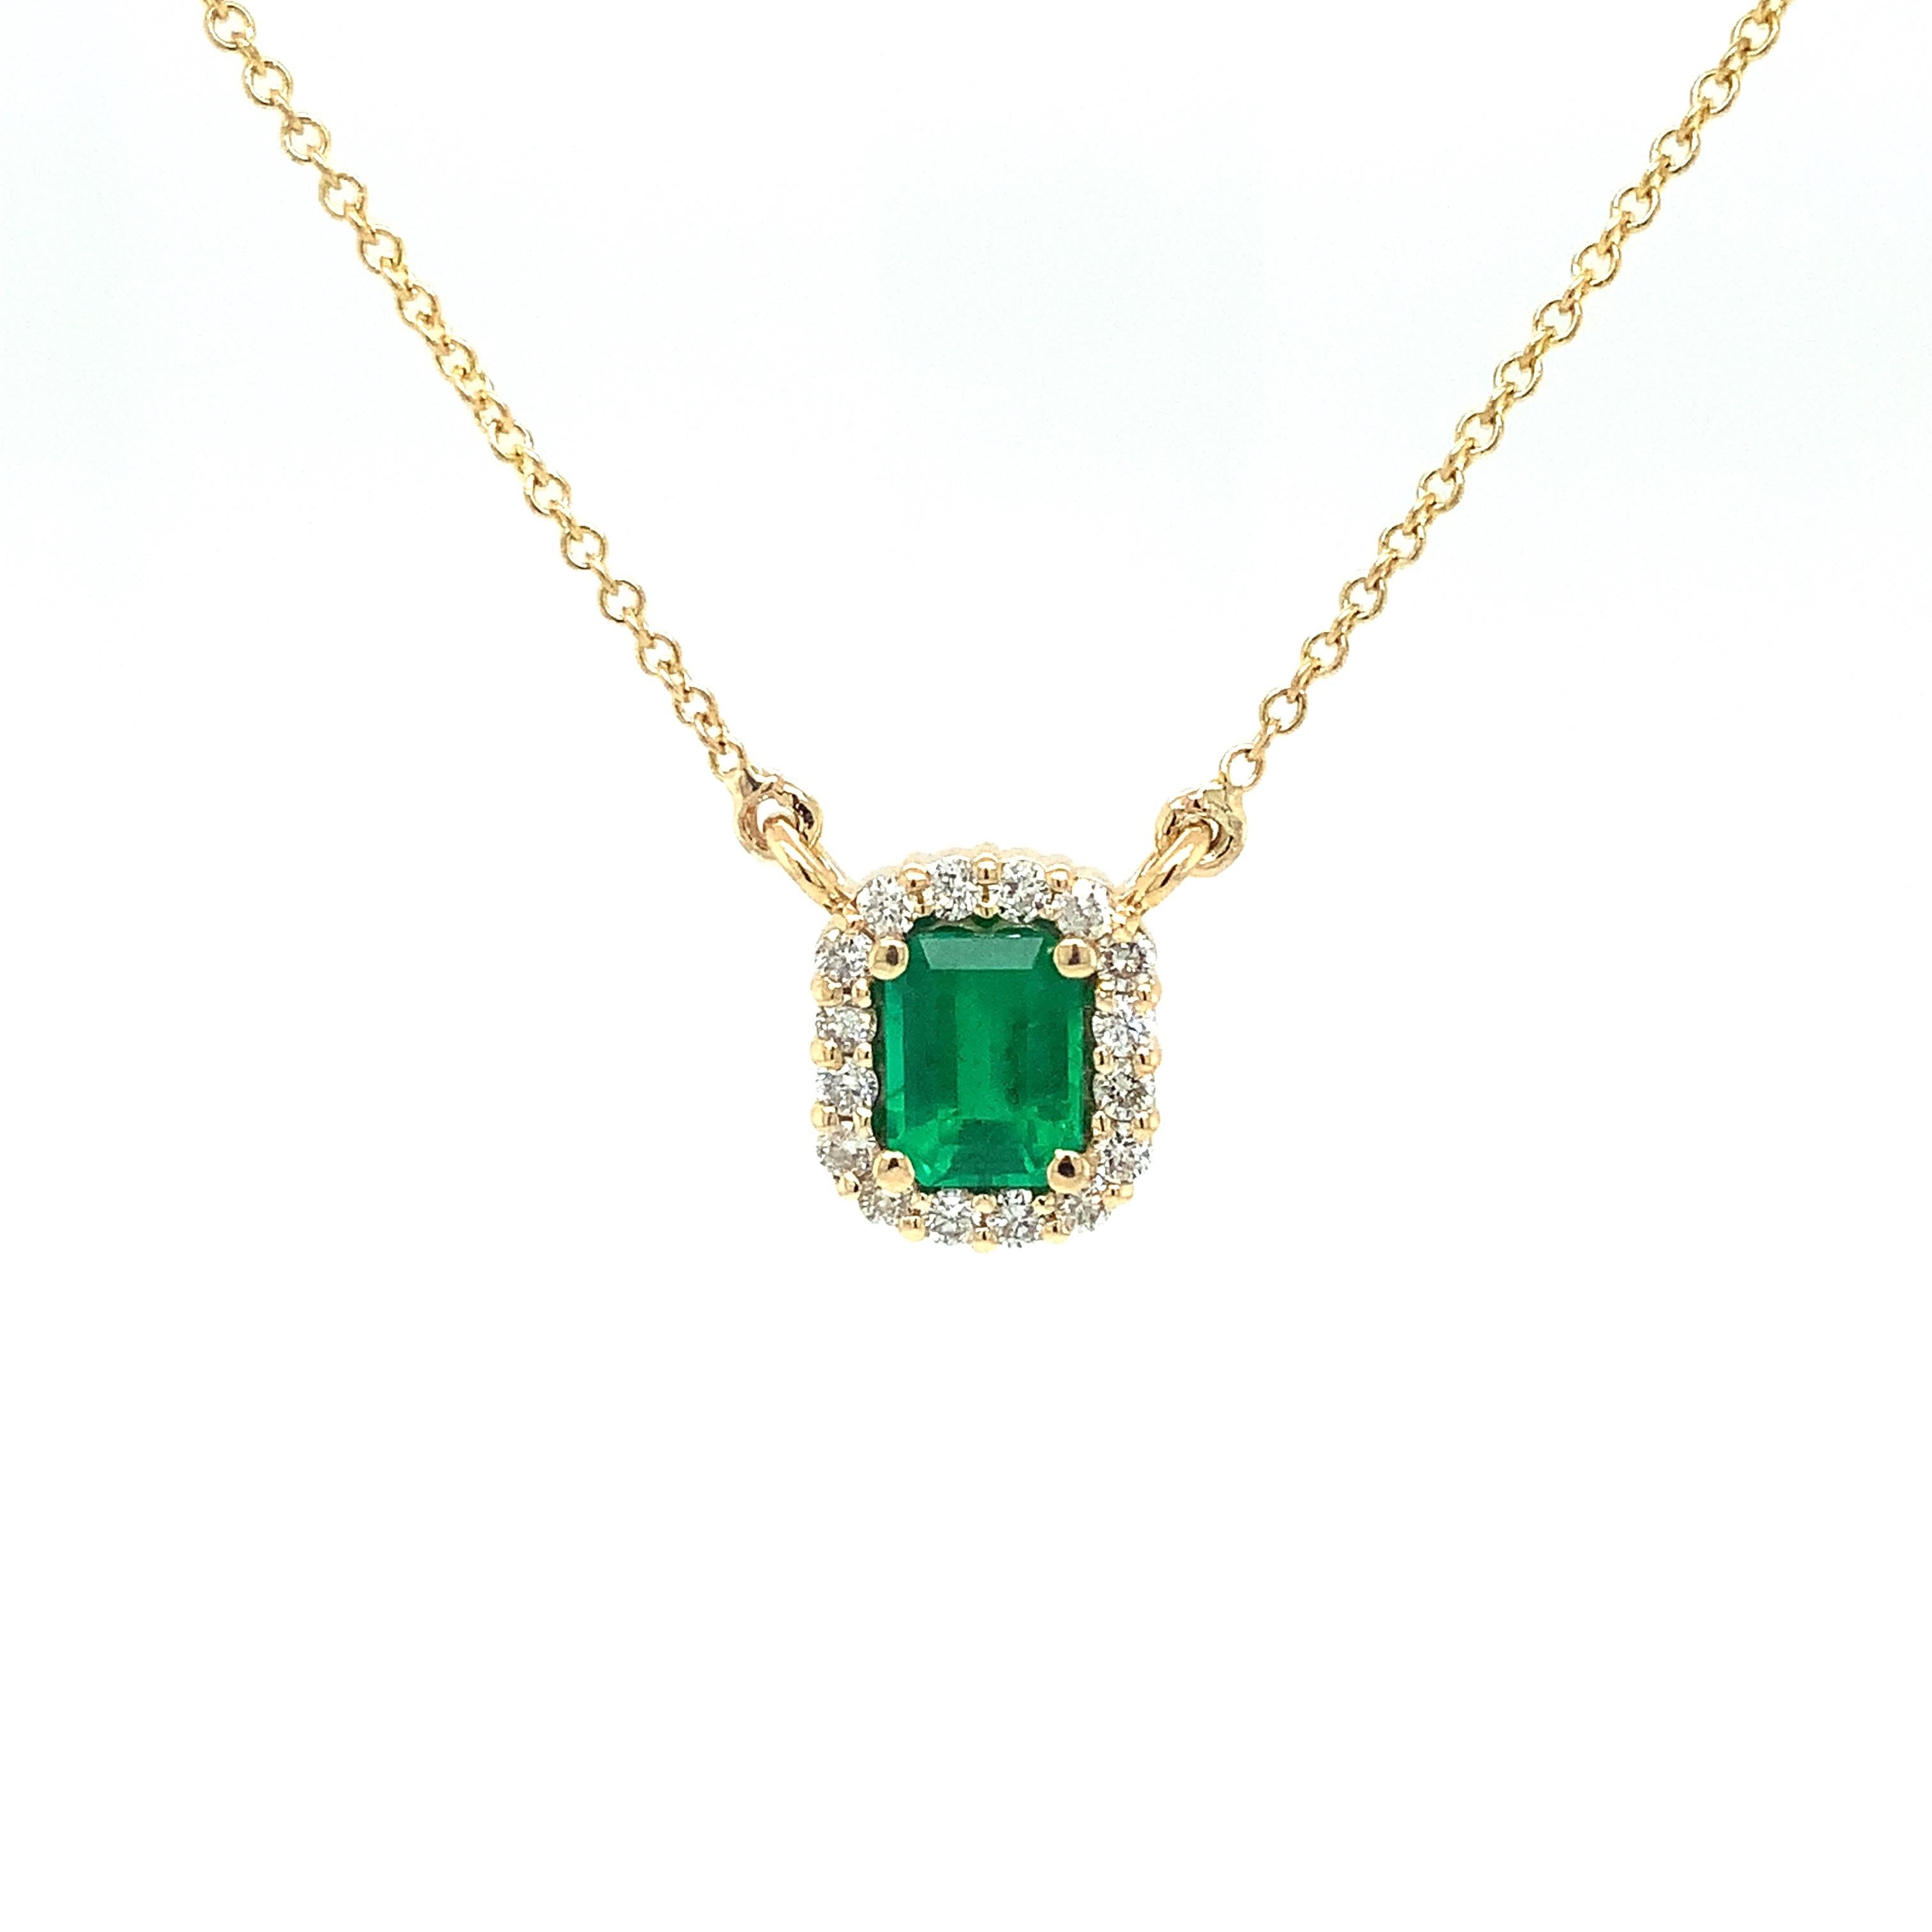 Emerald Cut Elegant Emerald and Diamond Necklace Set in 18K Yellow Gold For Sale